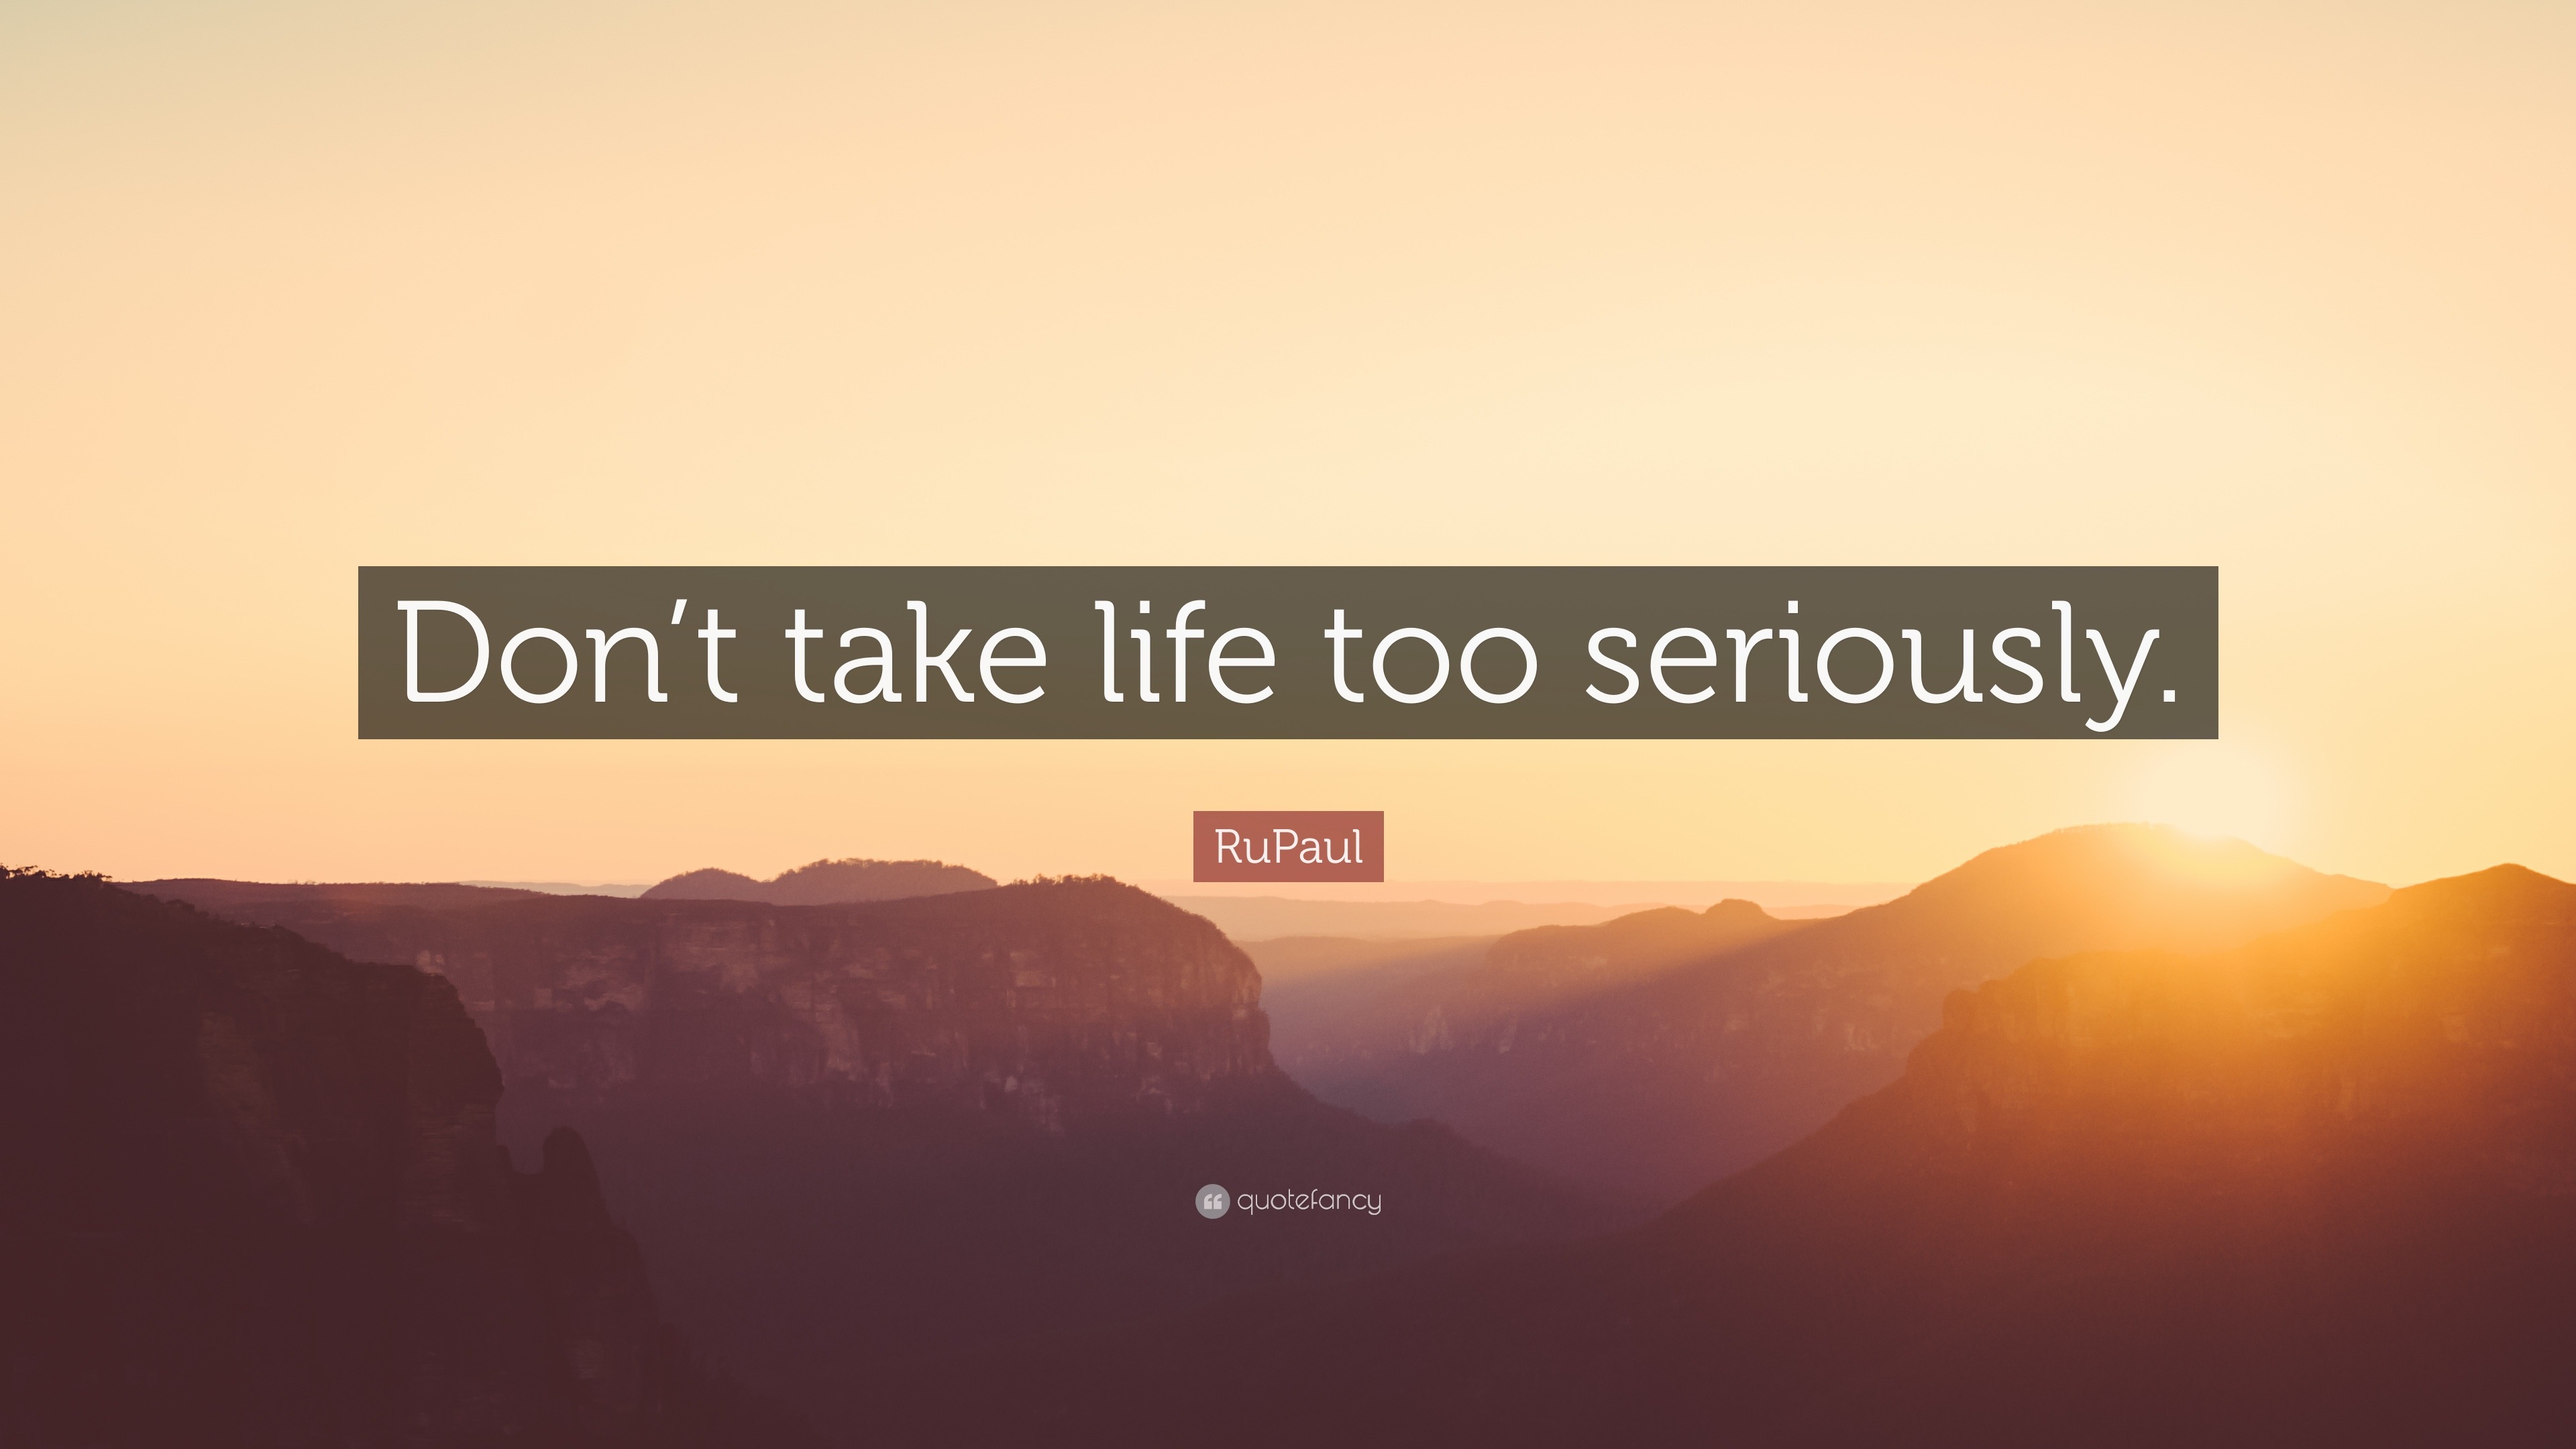 Sarcastic Quotes “Don t take life too seriously ” — RuPaul